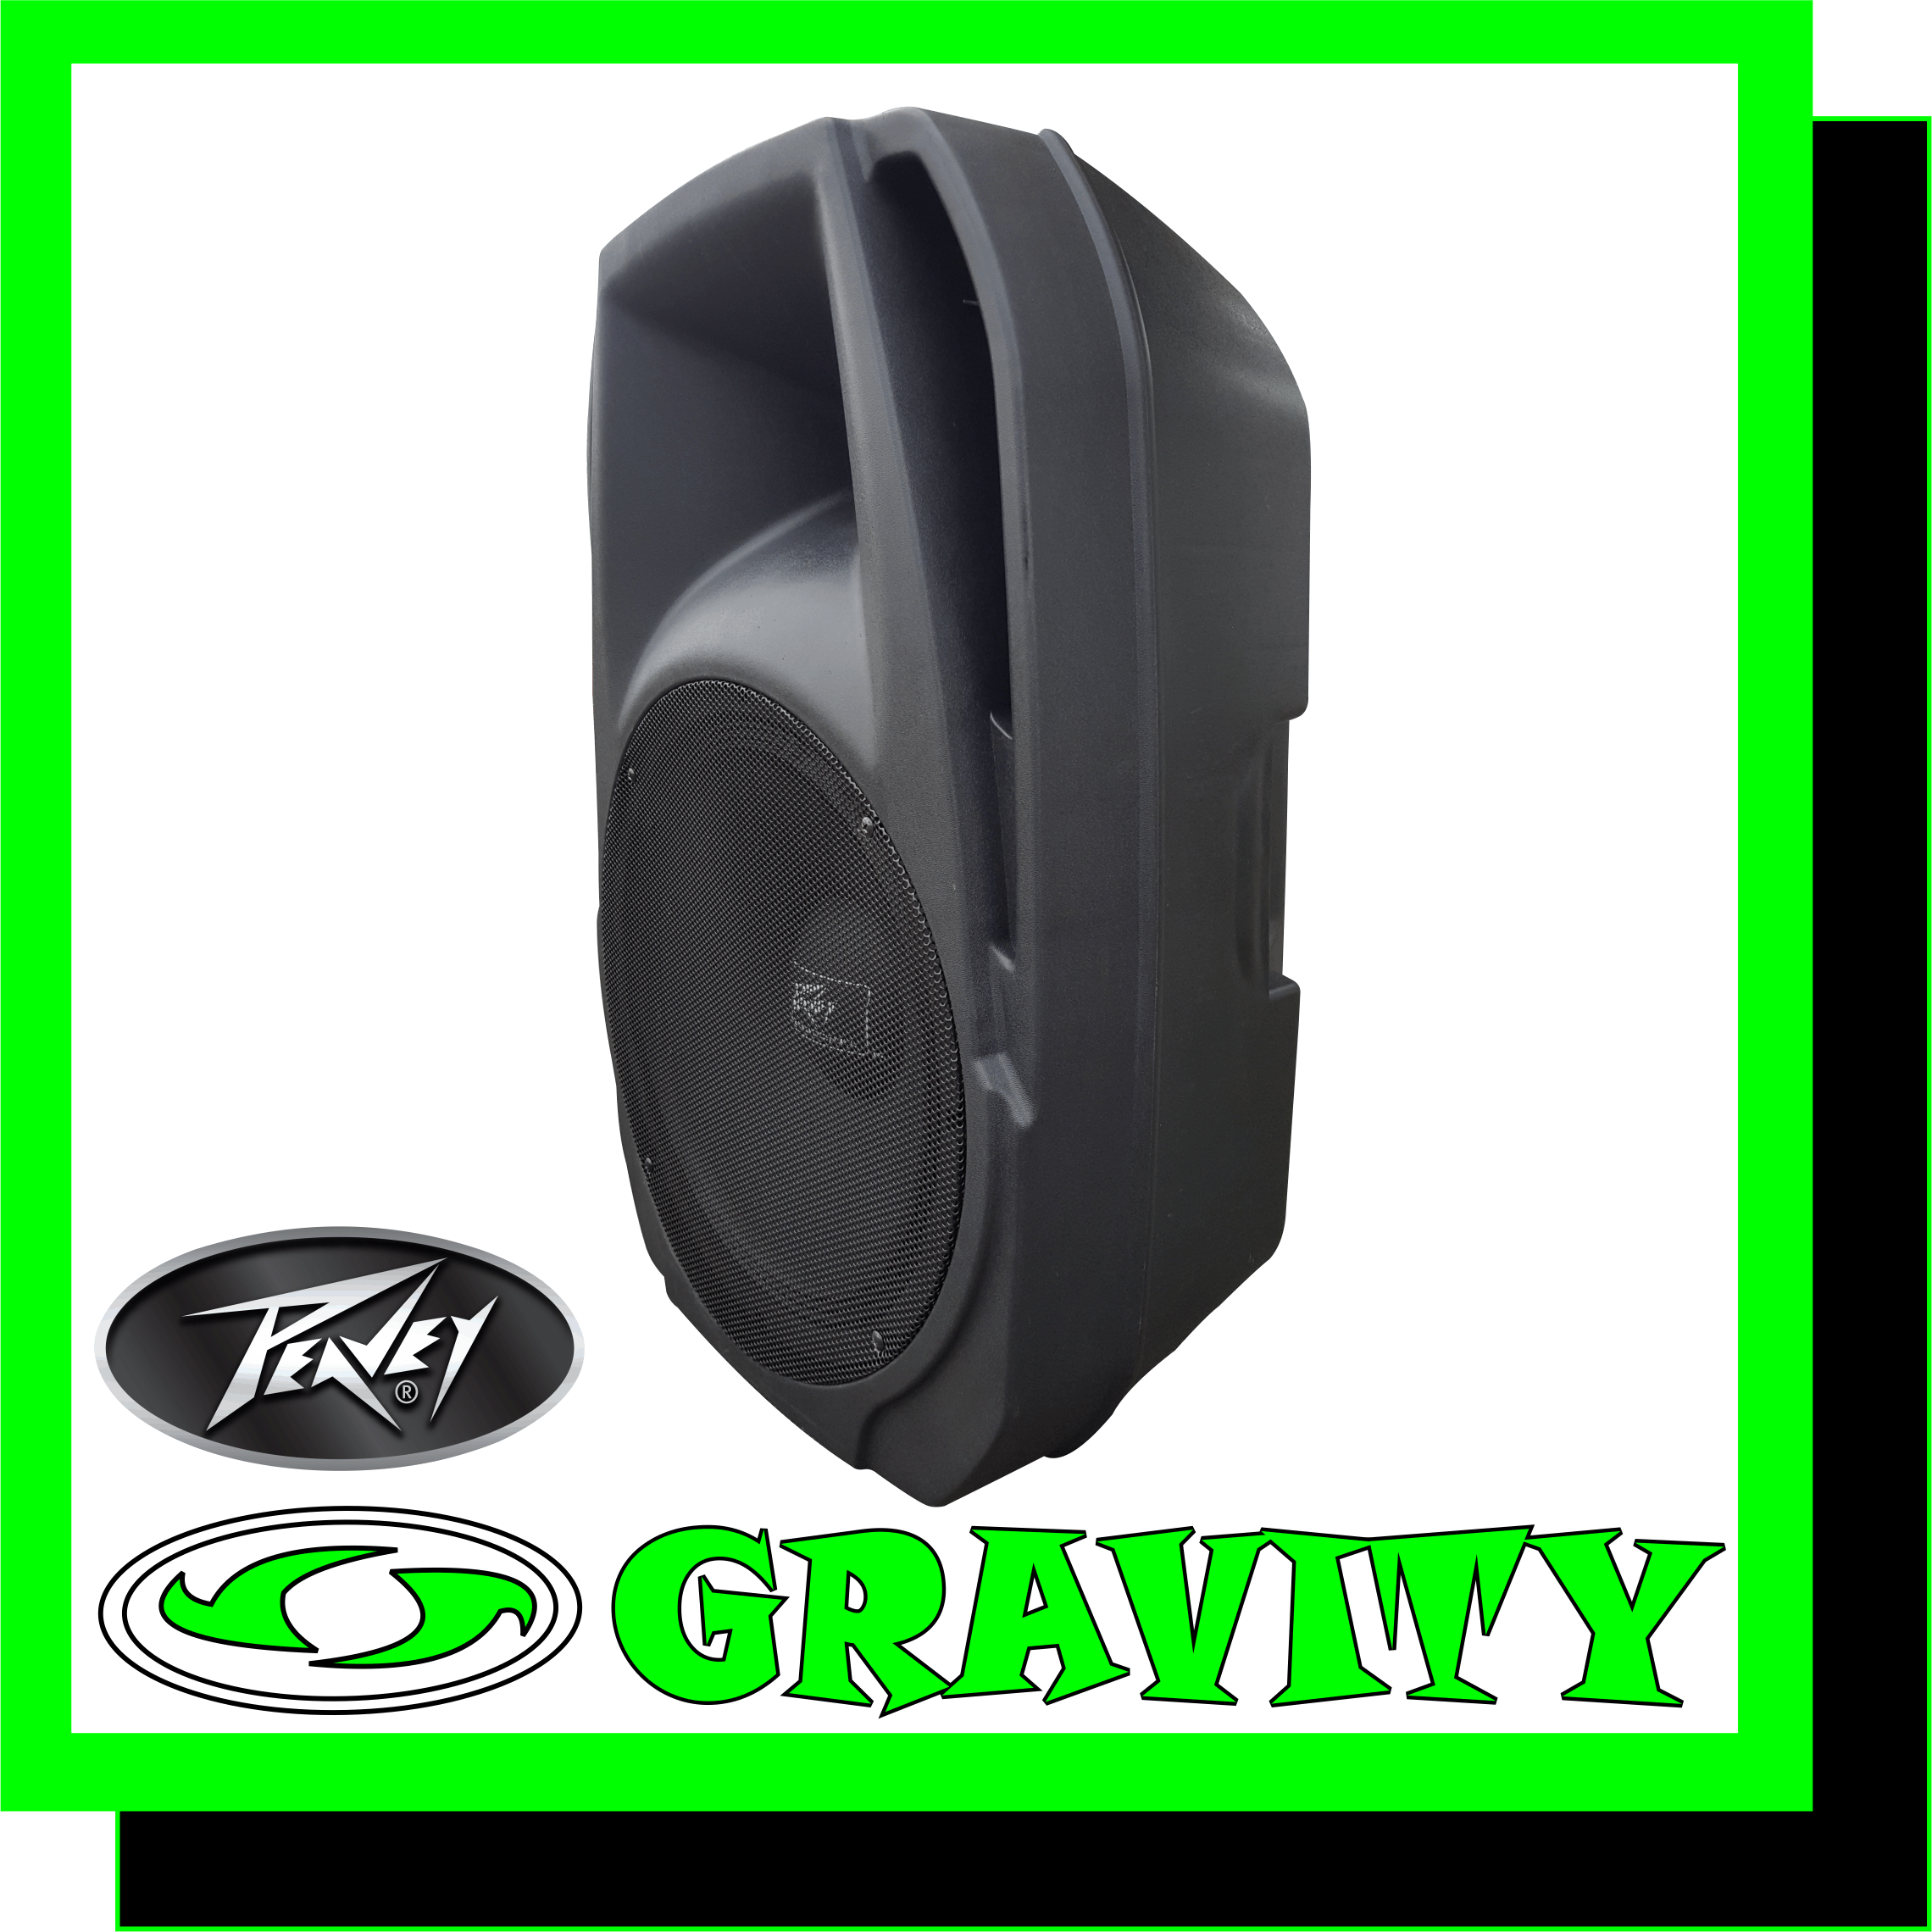 SPECS Two-way passive sound reinorcement enclosure 15inch heavy duty woofer 60w compression driver with 1.4 titanium diaphragm 560w program power handling rating 60x45 semi-exponential horn Pole mount molded-in Heavy-duty perforated steel grille,with powder coat finish